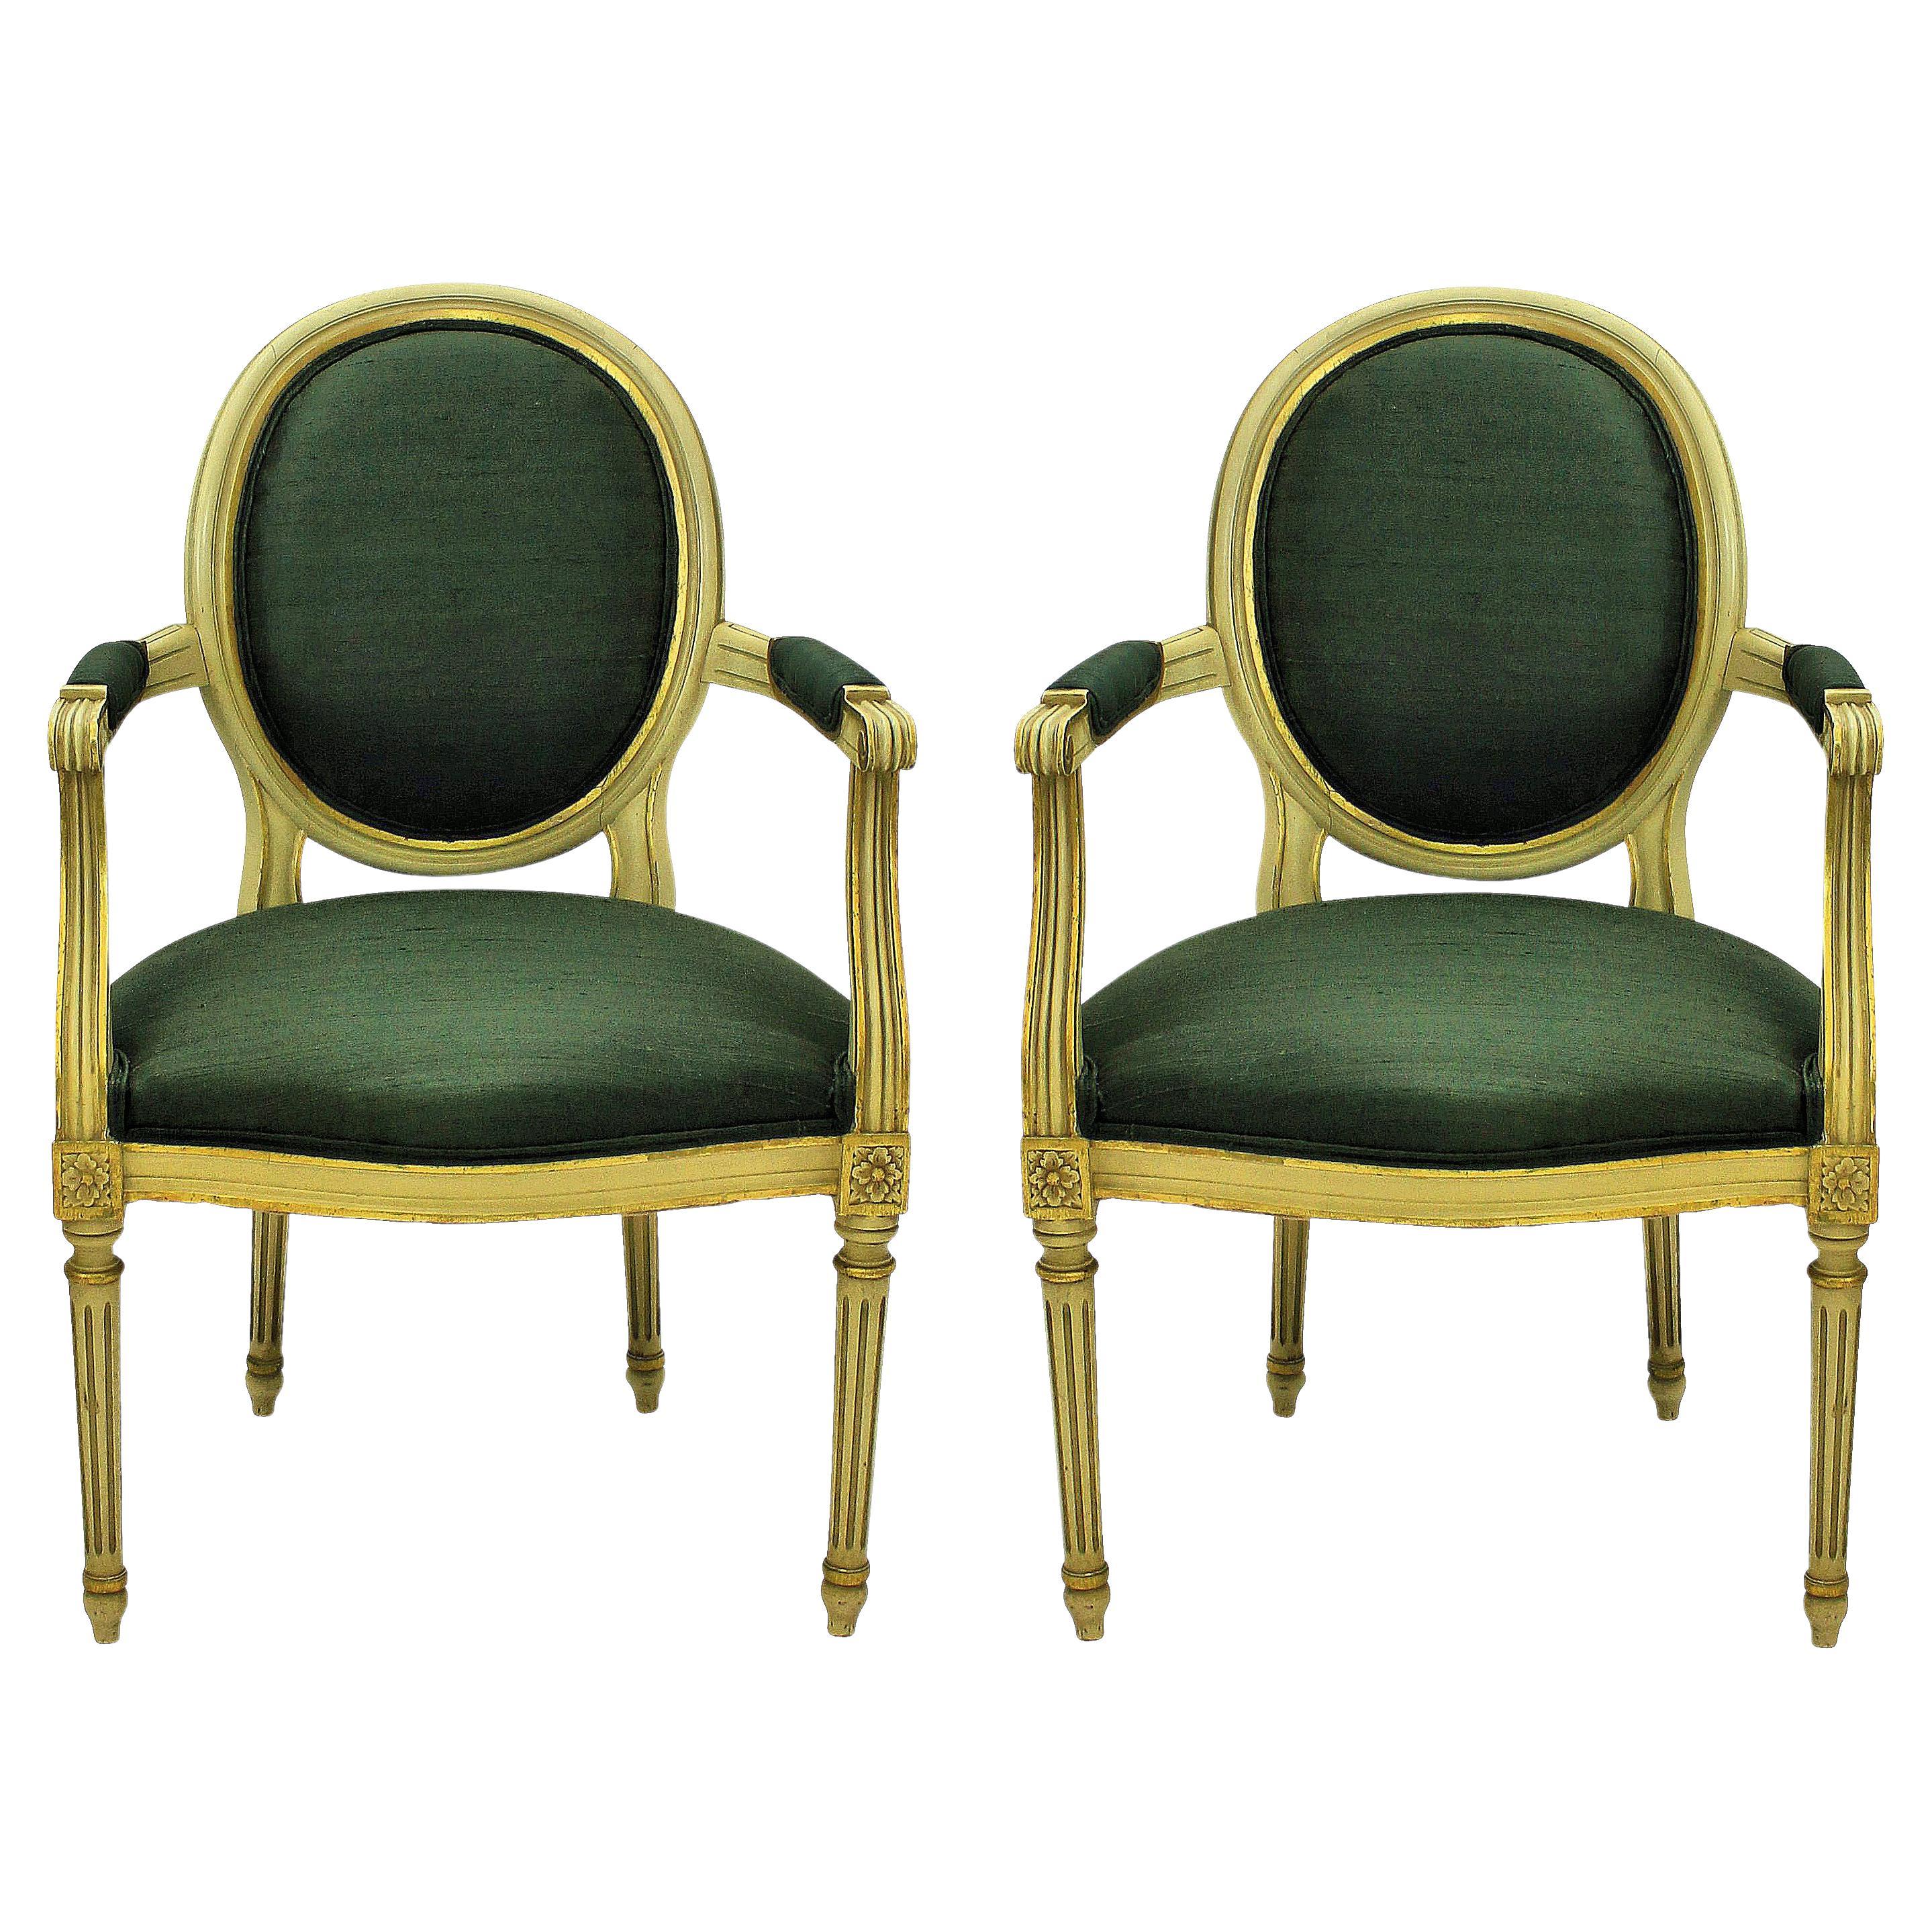 Pair of Louis XV Style Painted and Gilded Armchairs in Sage Green Silk